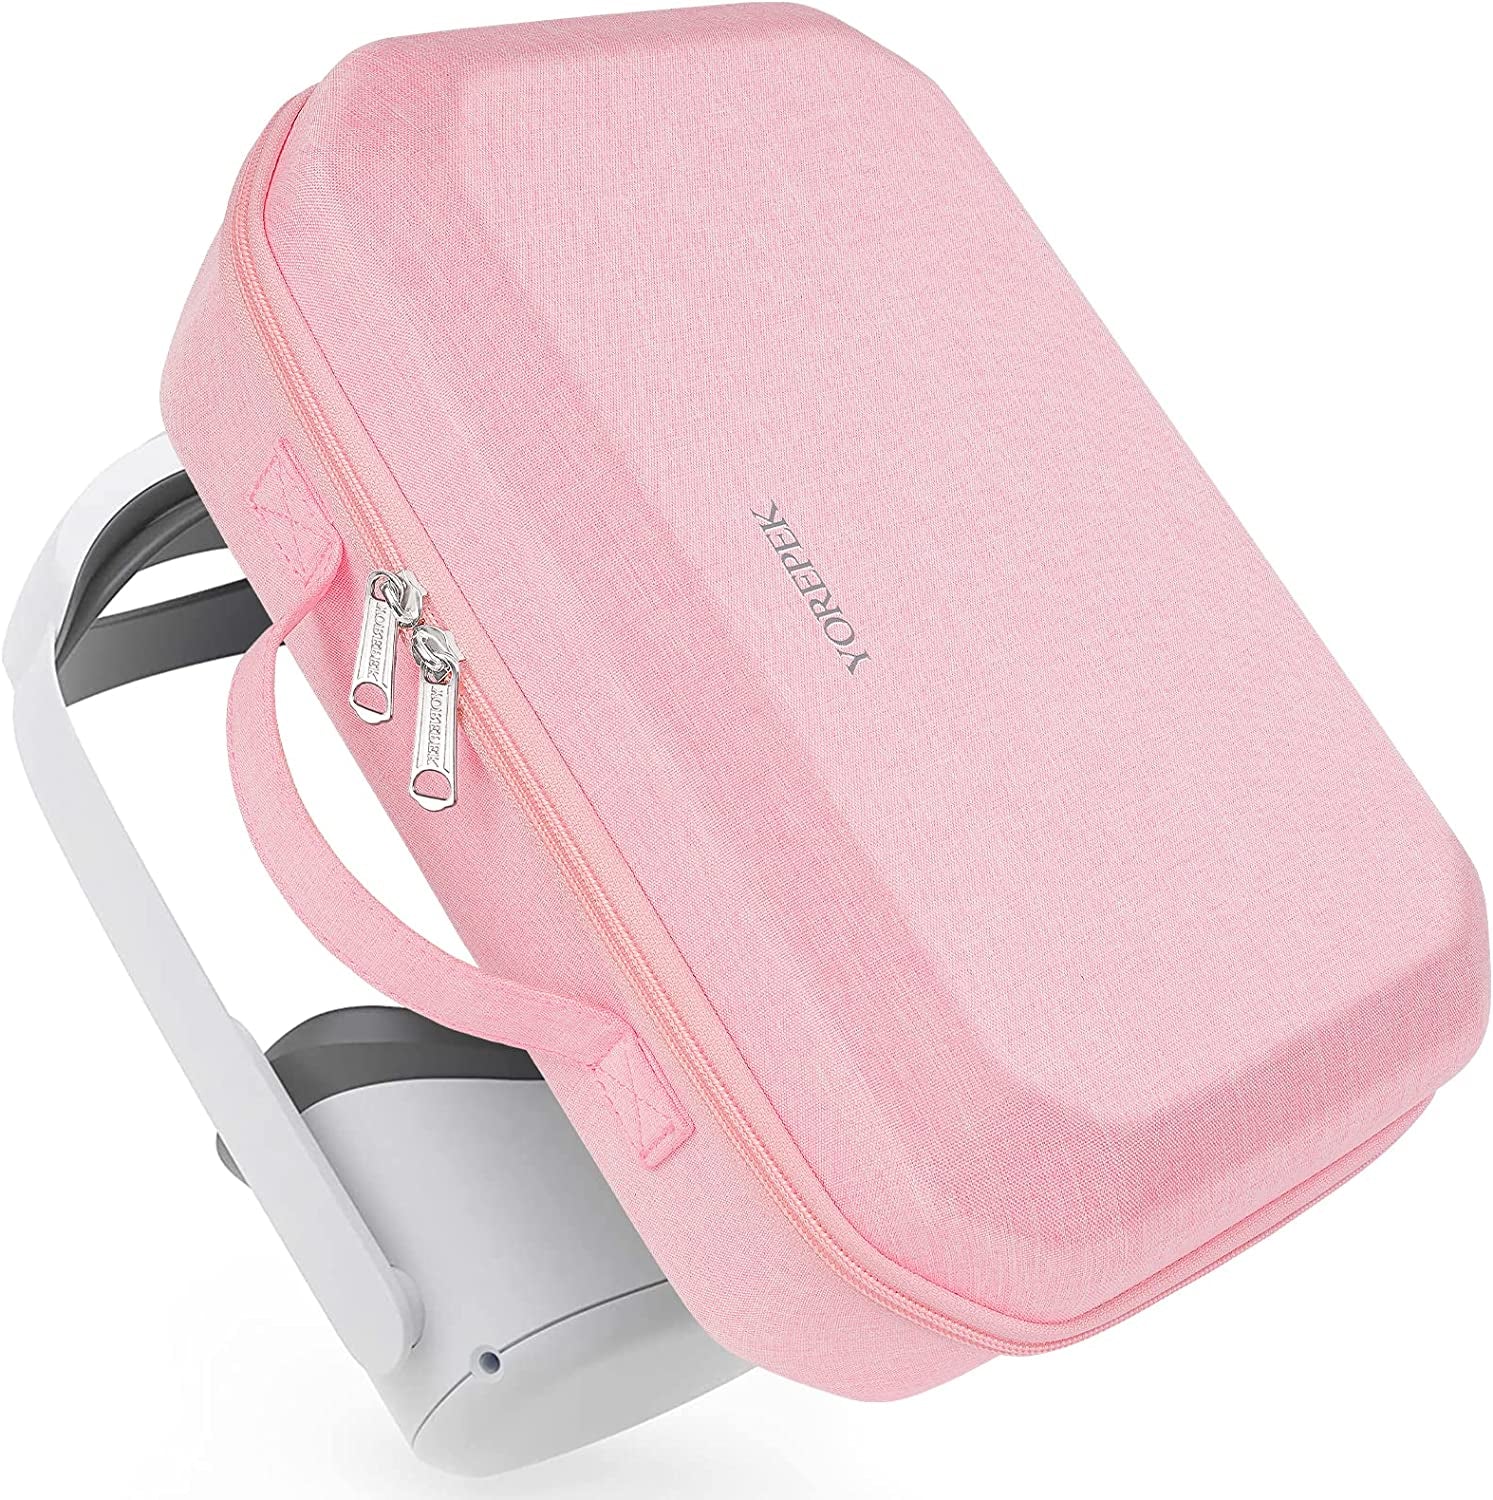 YOREPEK Cute Carrying Case Compatible with Oculus Quest 2 Headsets, Basic Elite Strap, Controllers and VR Accessories for Women Girl, Hard Meta Carry Bag for Travel and Home Storage - Pink